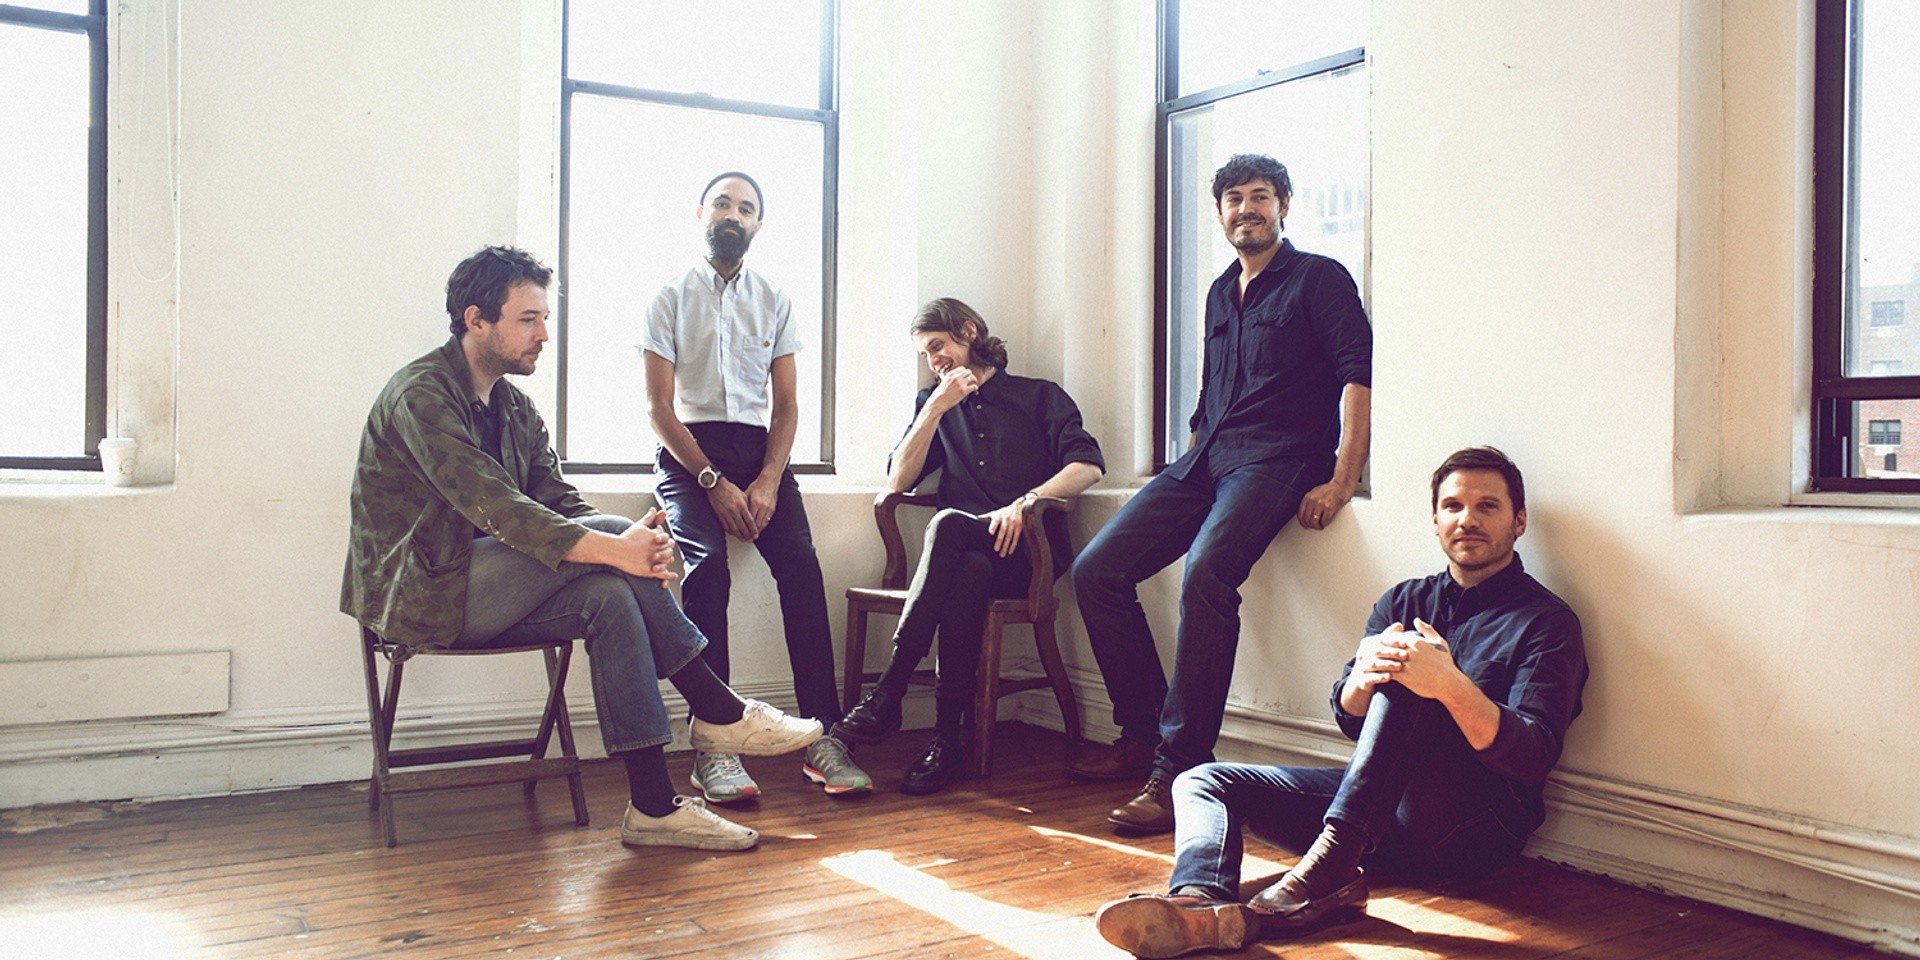 Fleet Foxes will perform in Singapore for the first time